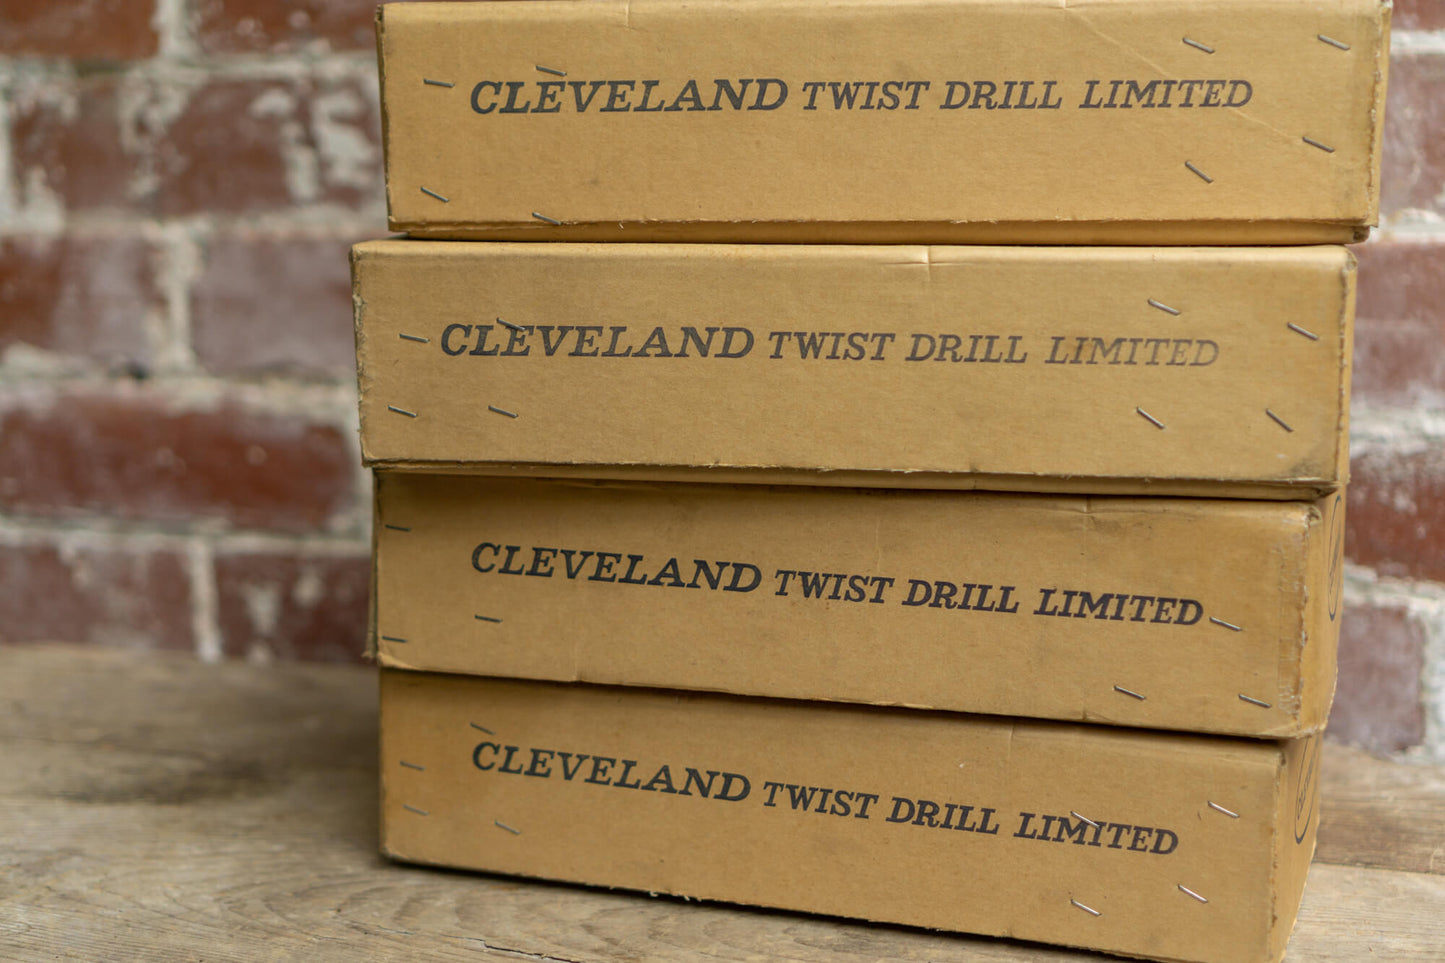 'Cleveland' Cardboard Boxes